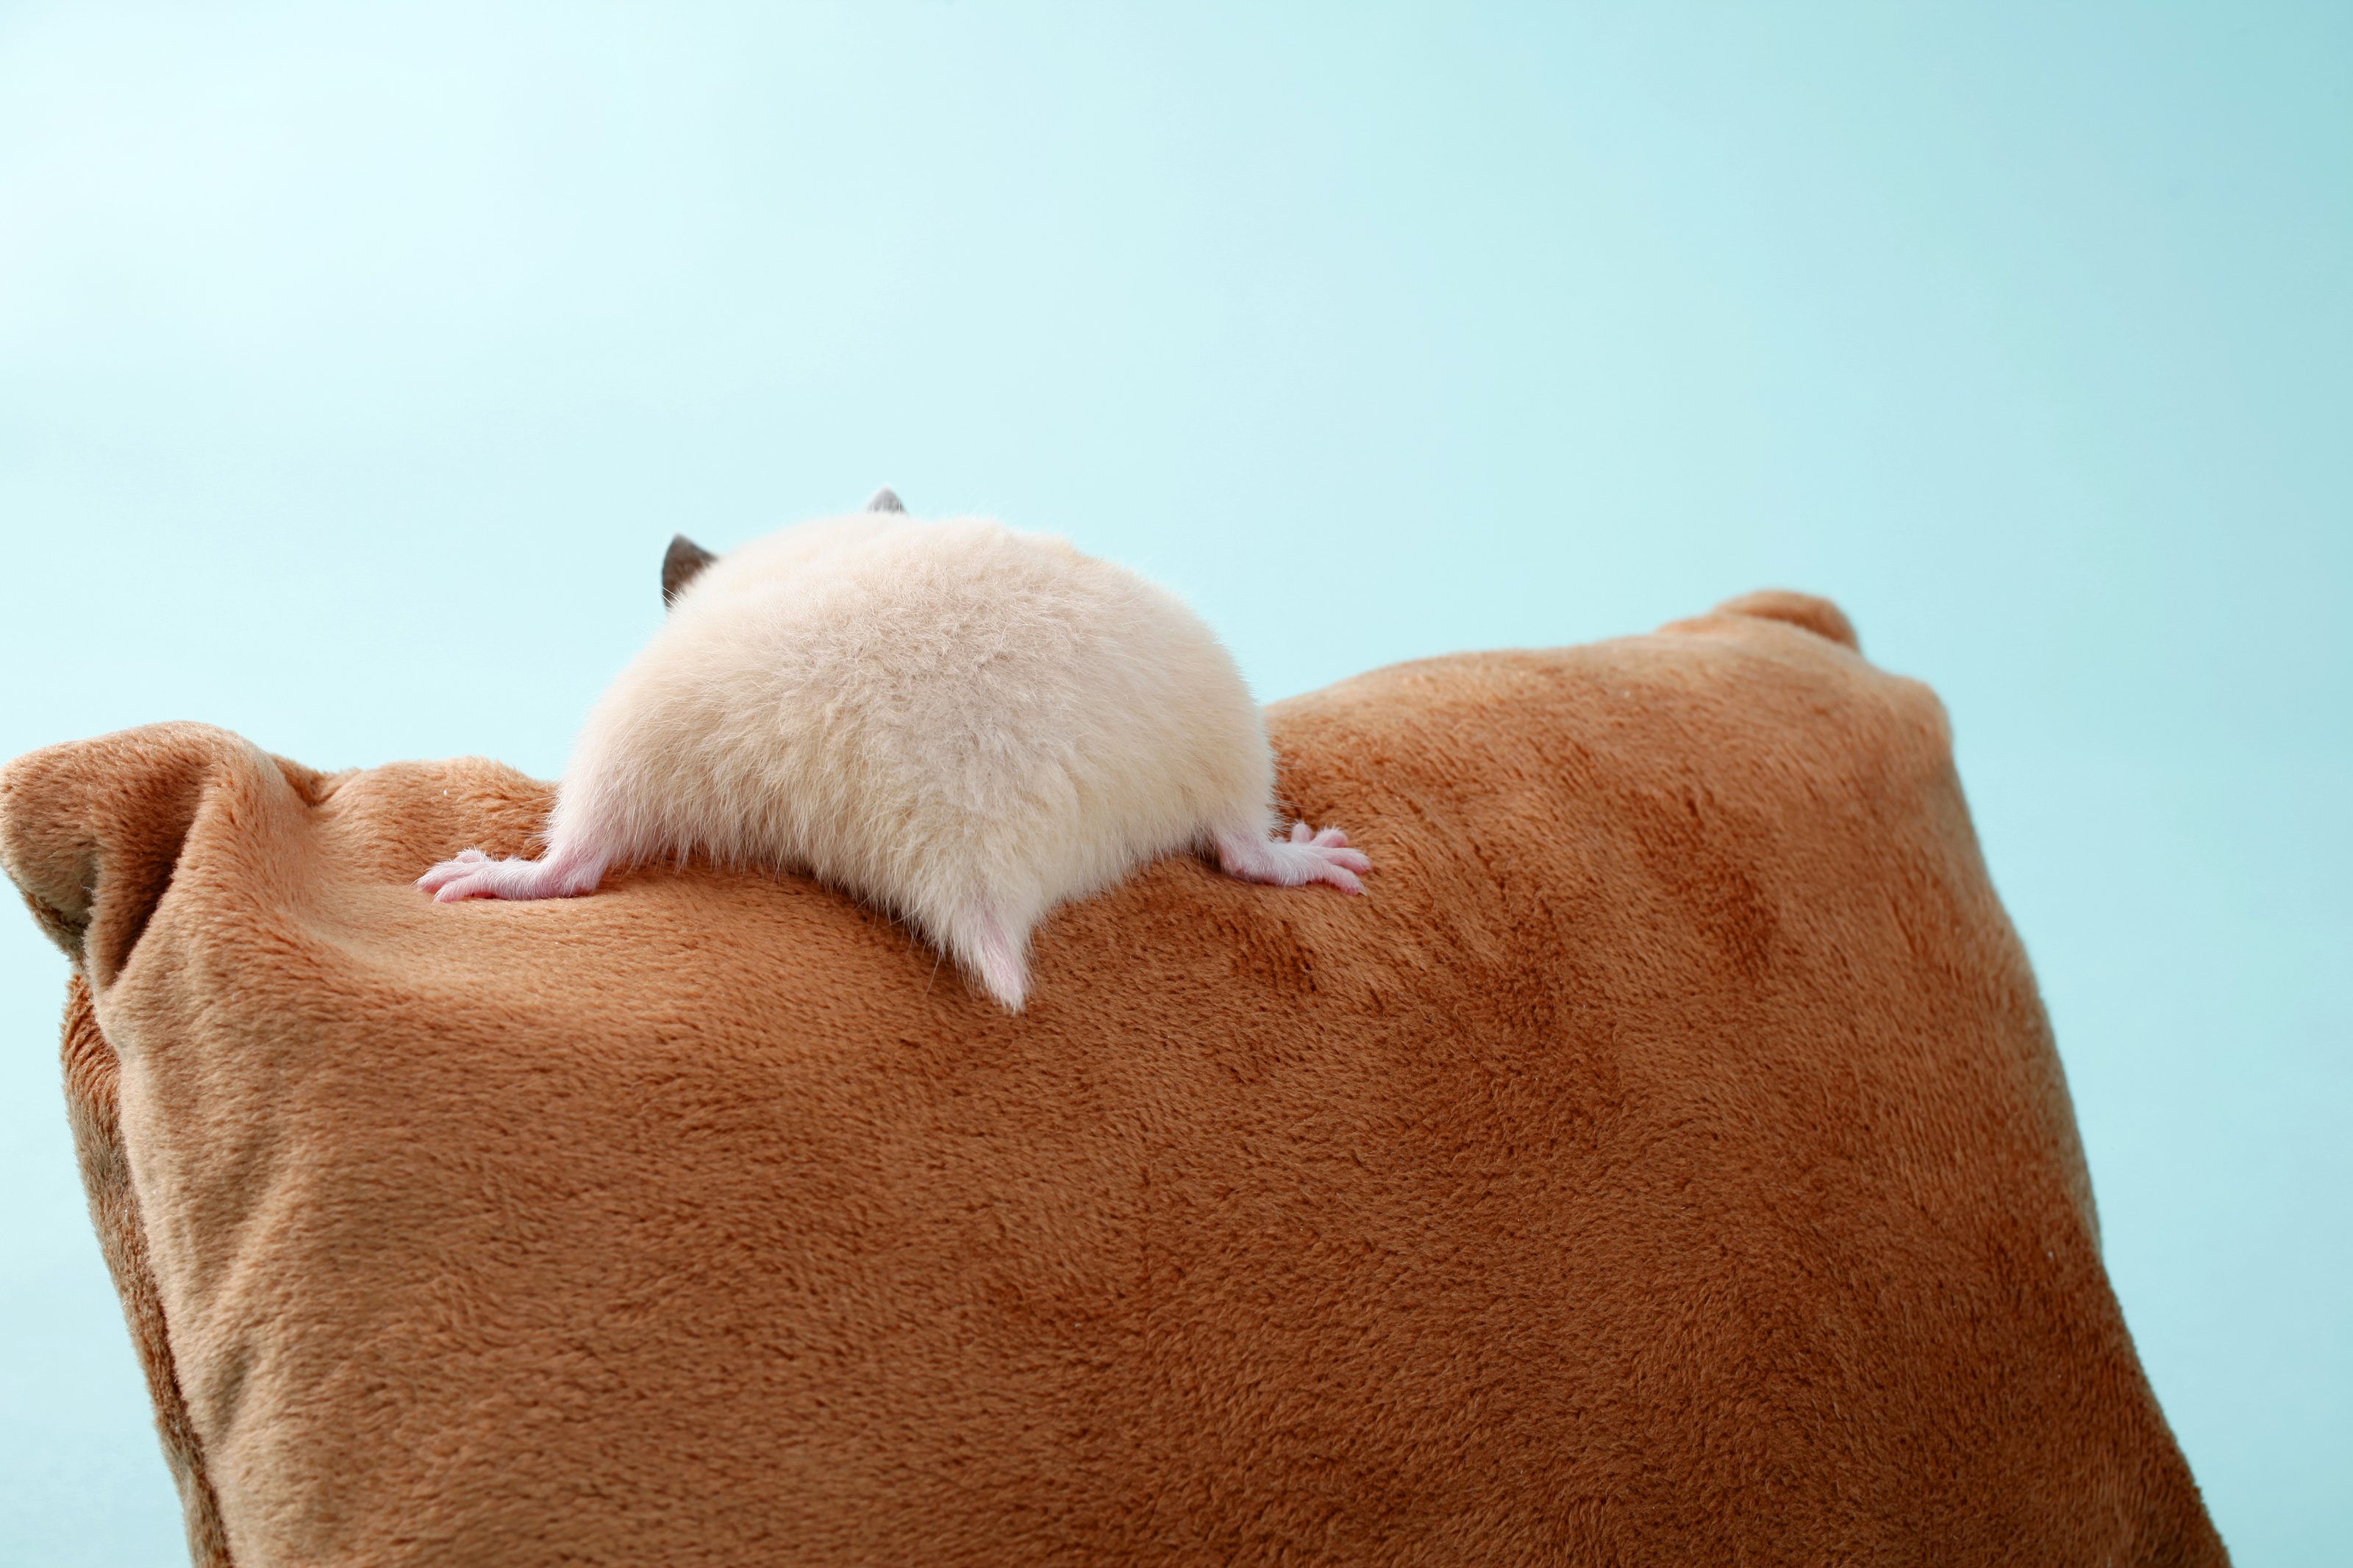 Hamster Butt Photos From Japan Are Super Cute | Time